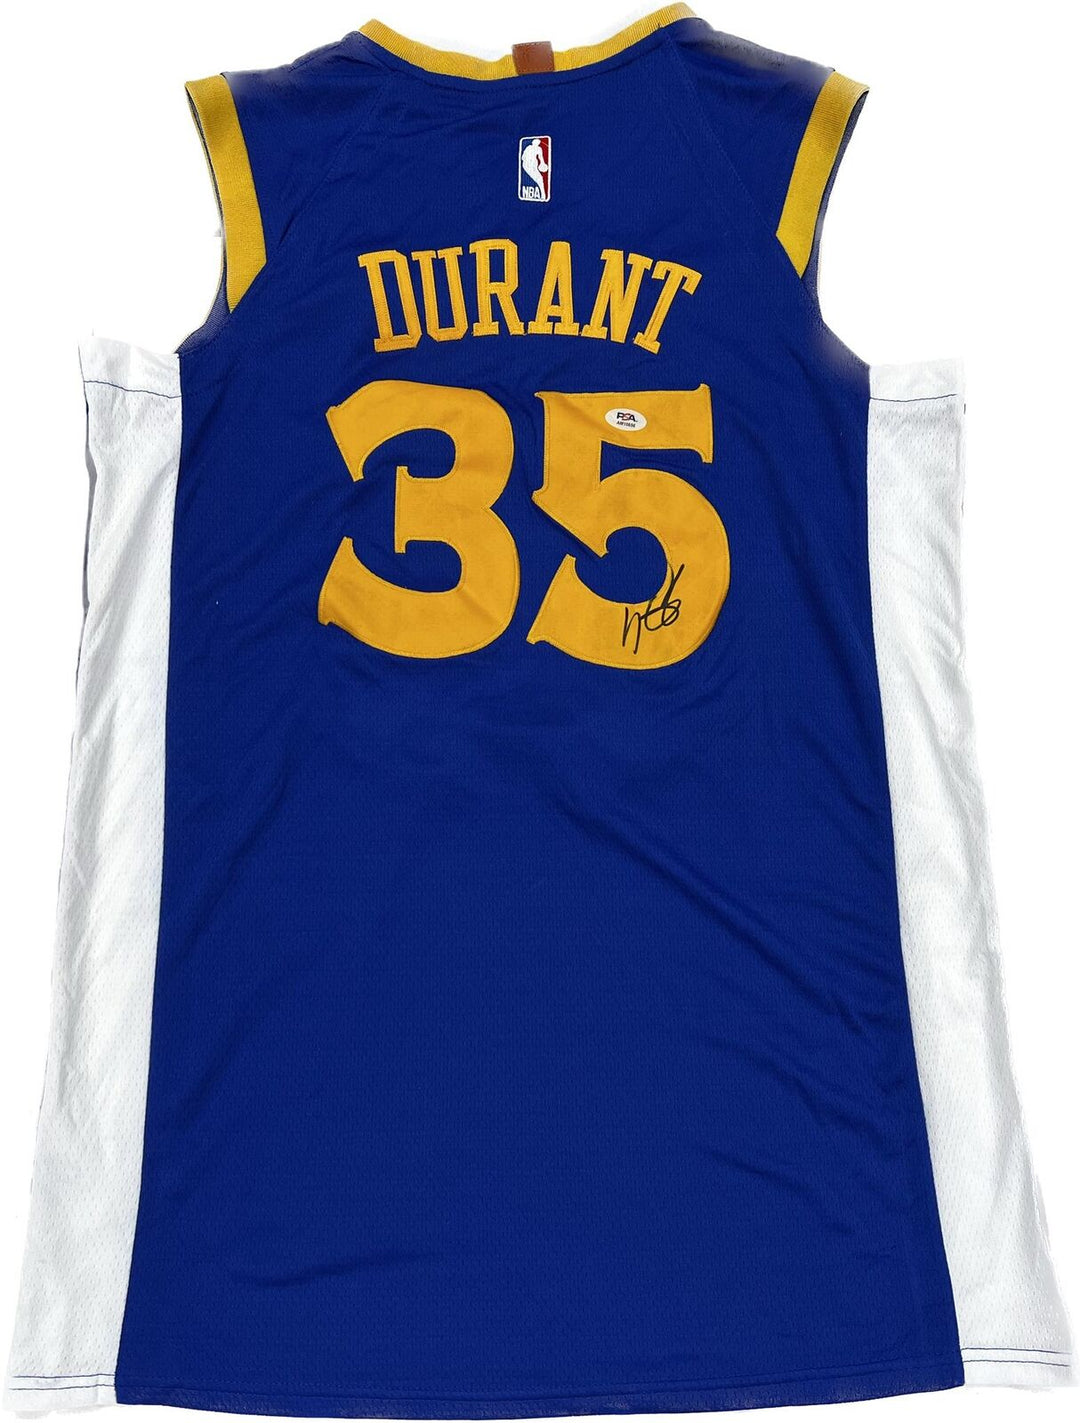 Kevin Durant signed jersey PSA/DNA Golden State Warriors Autographed Image 1